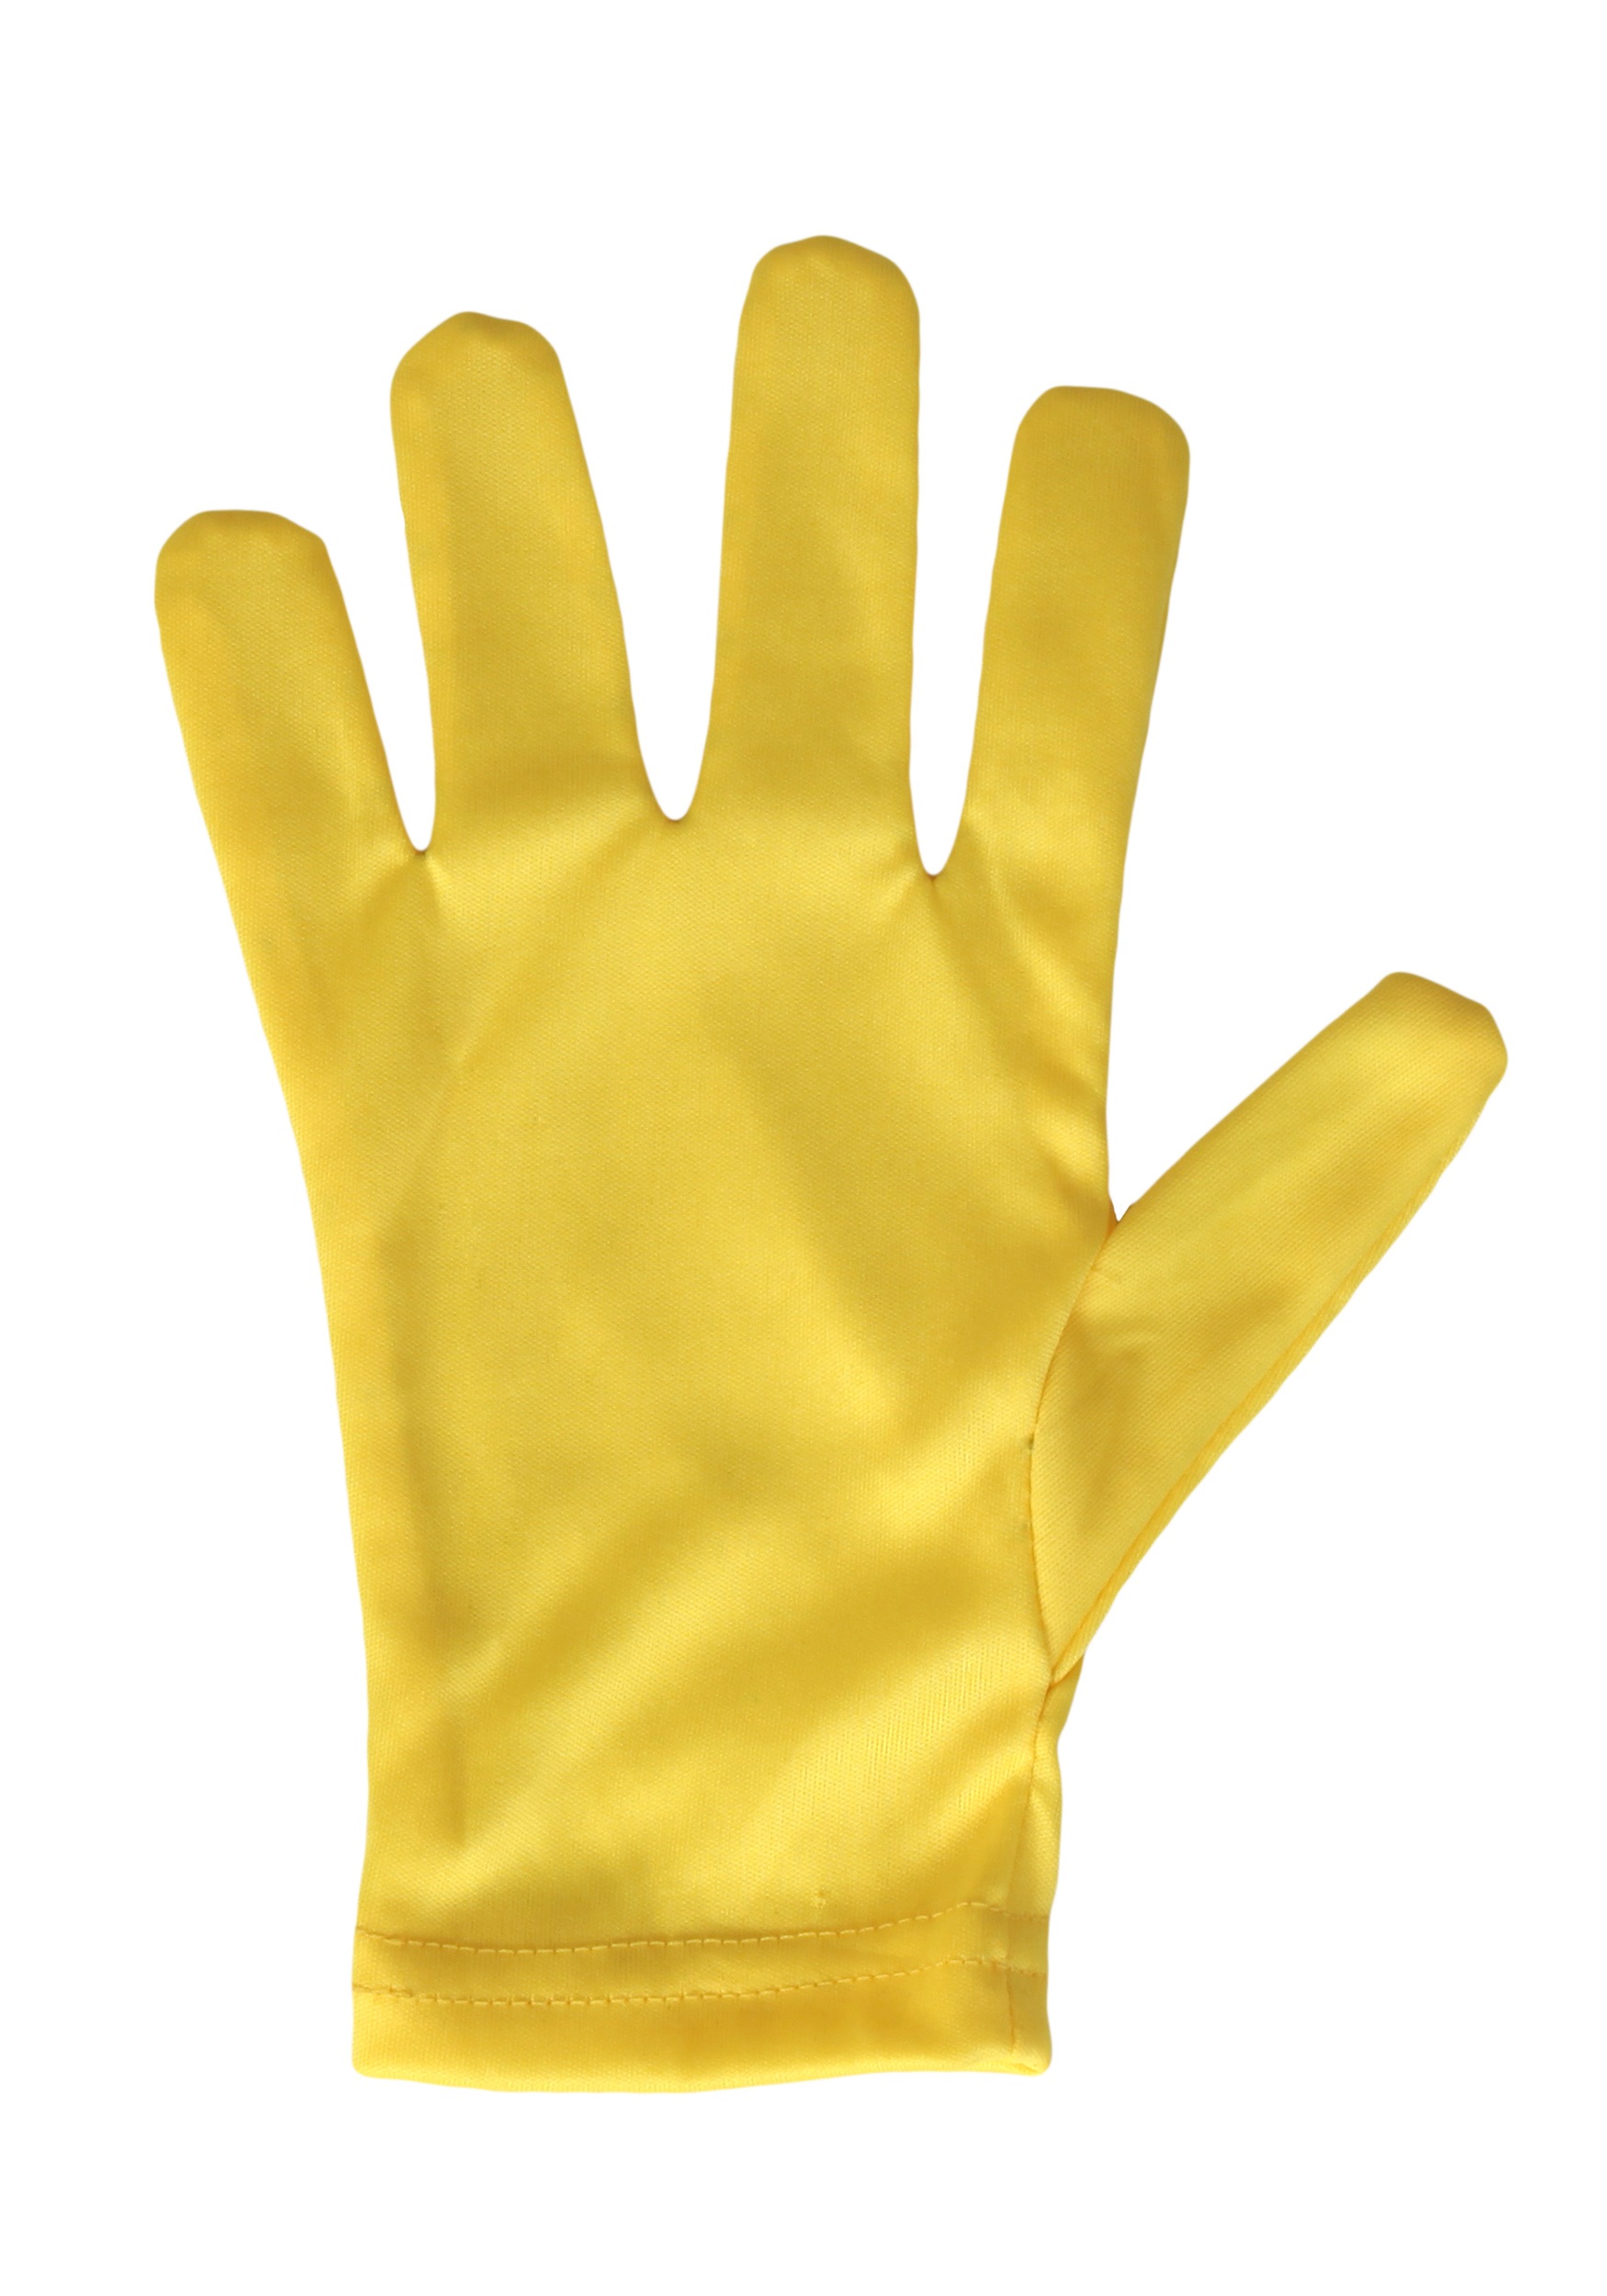 Cool Yellow Gloves